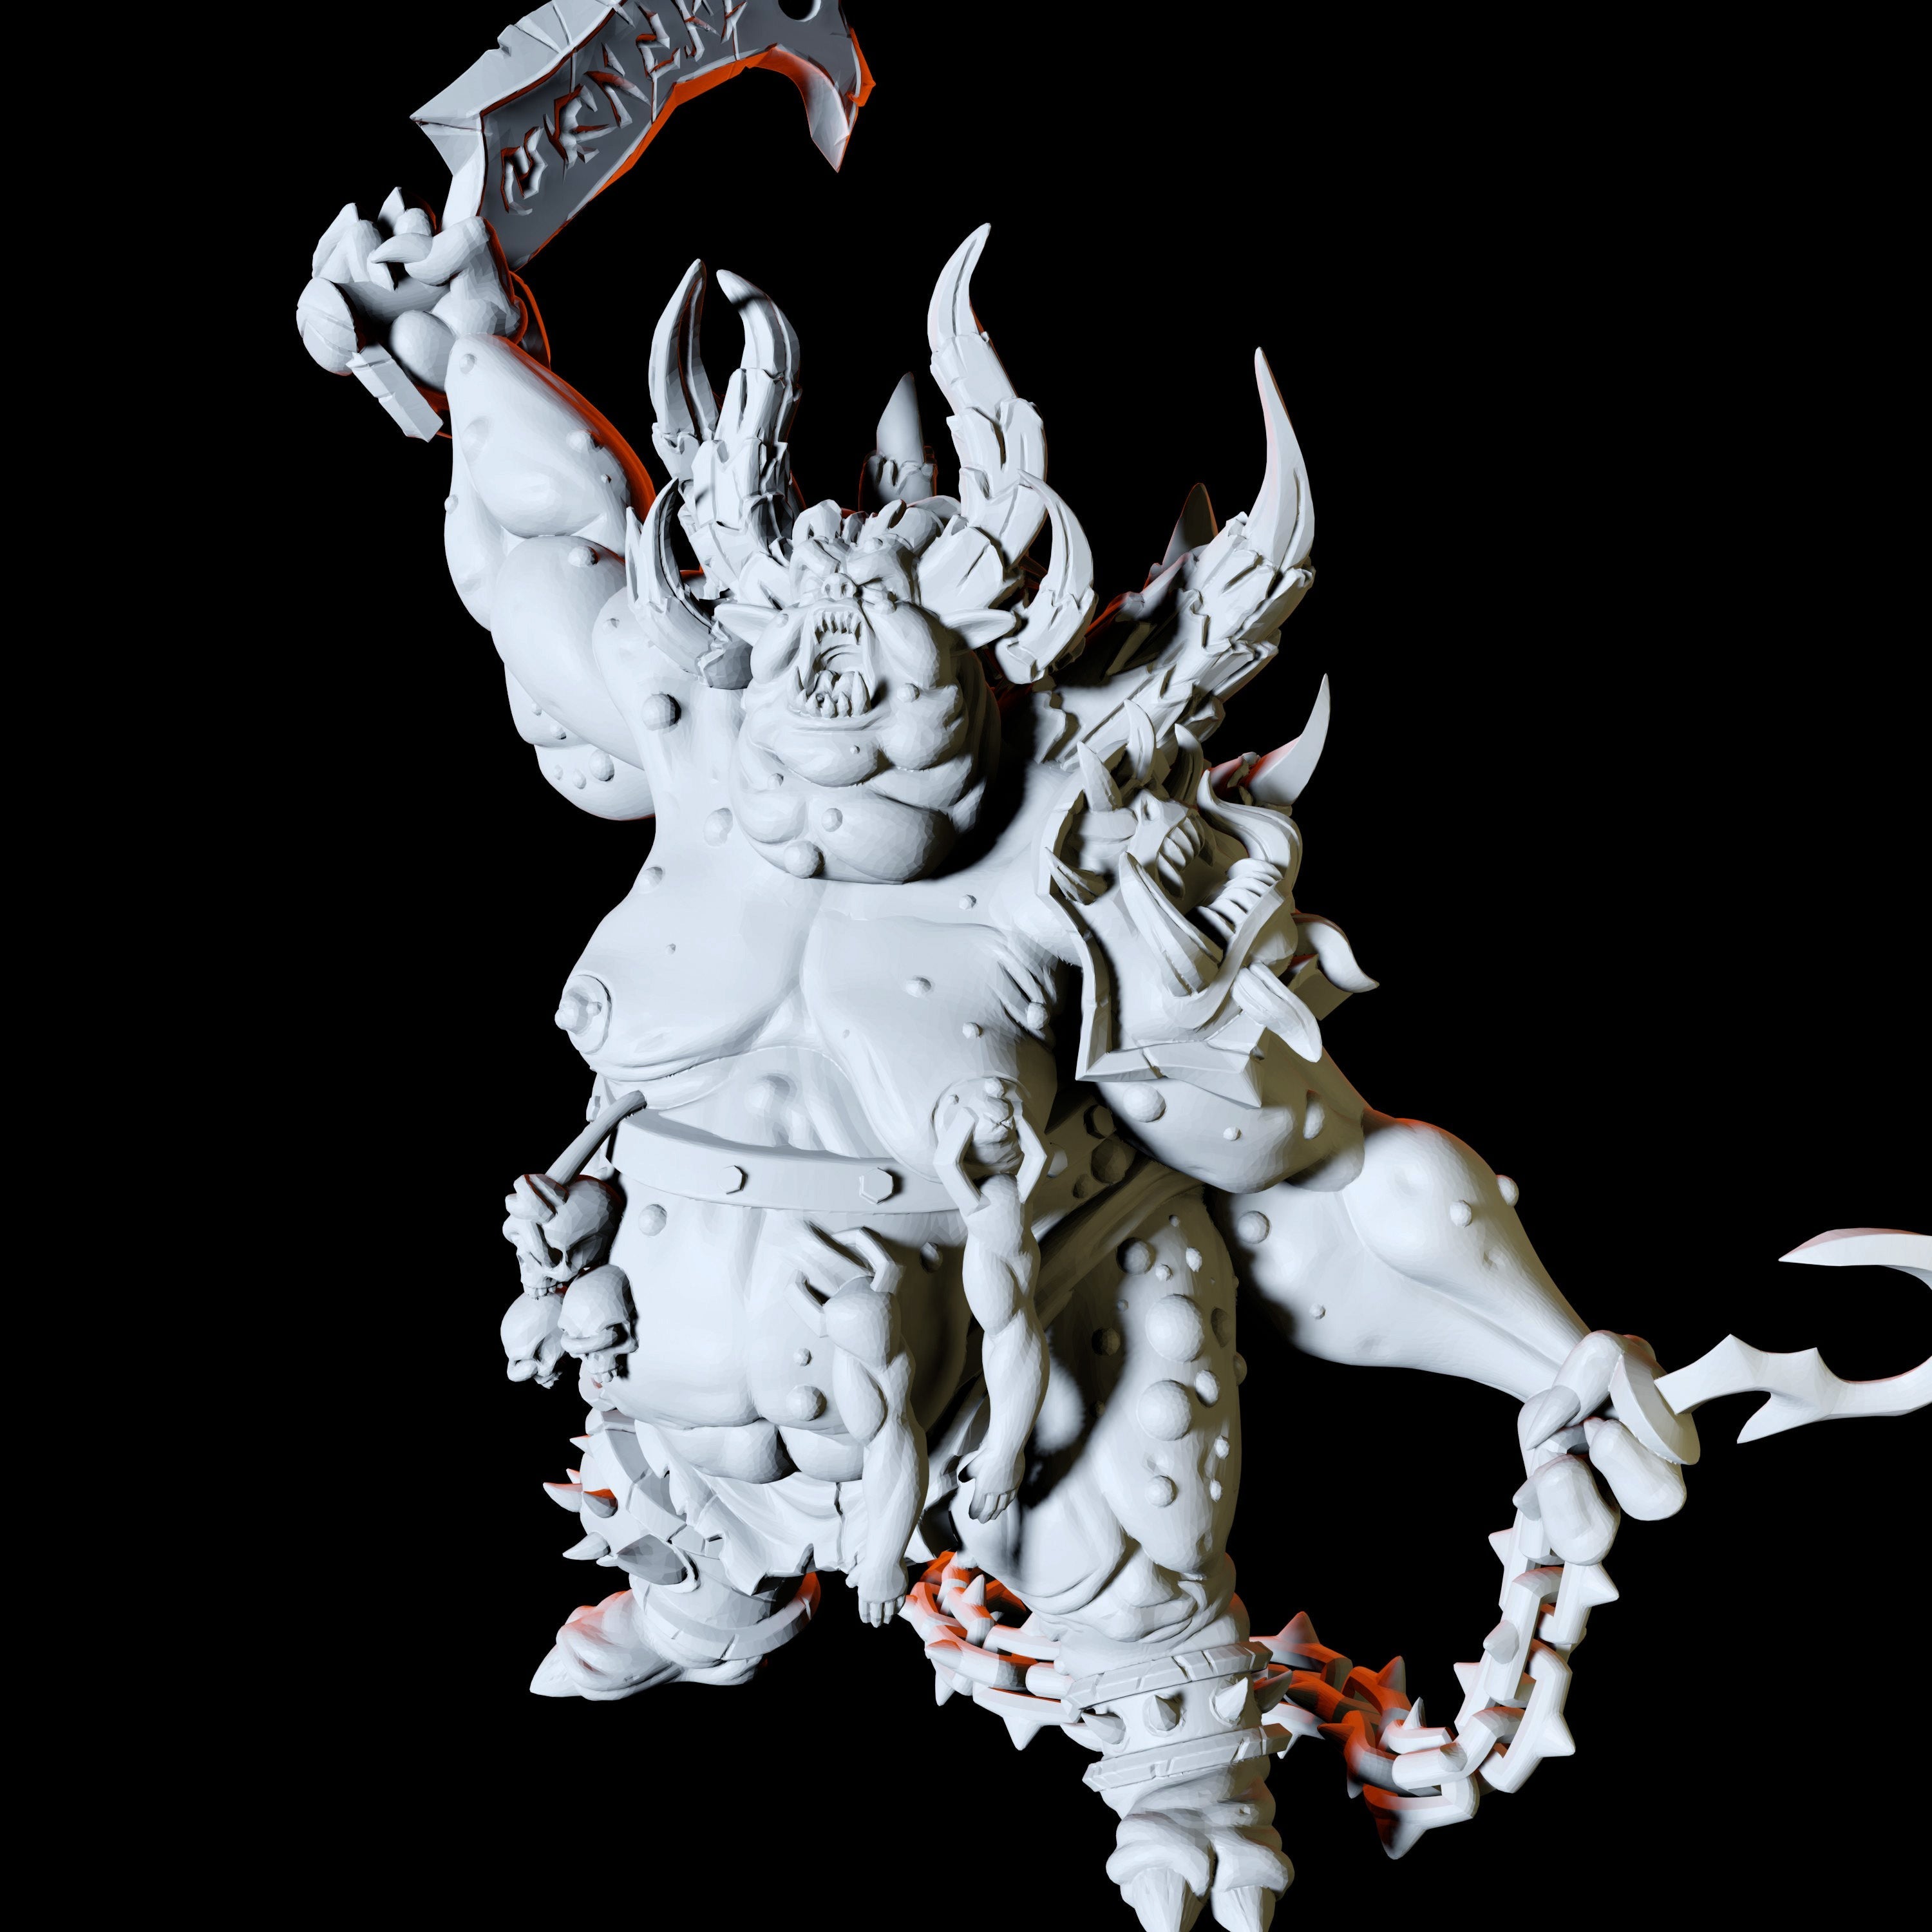 Nupperibo Devil Miniature for Dungeons and Dragons - Myth Forged